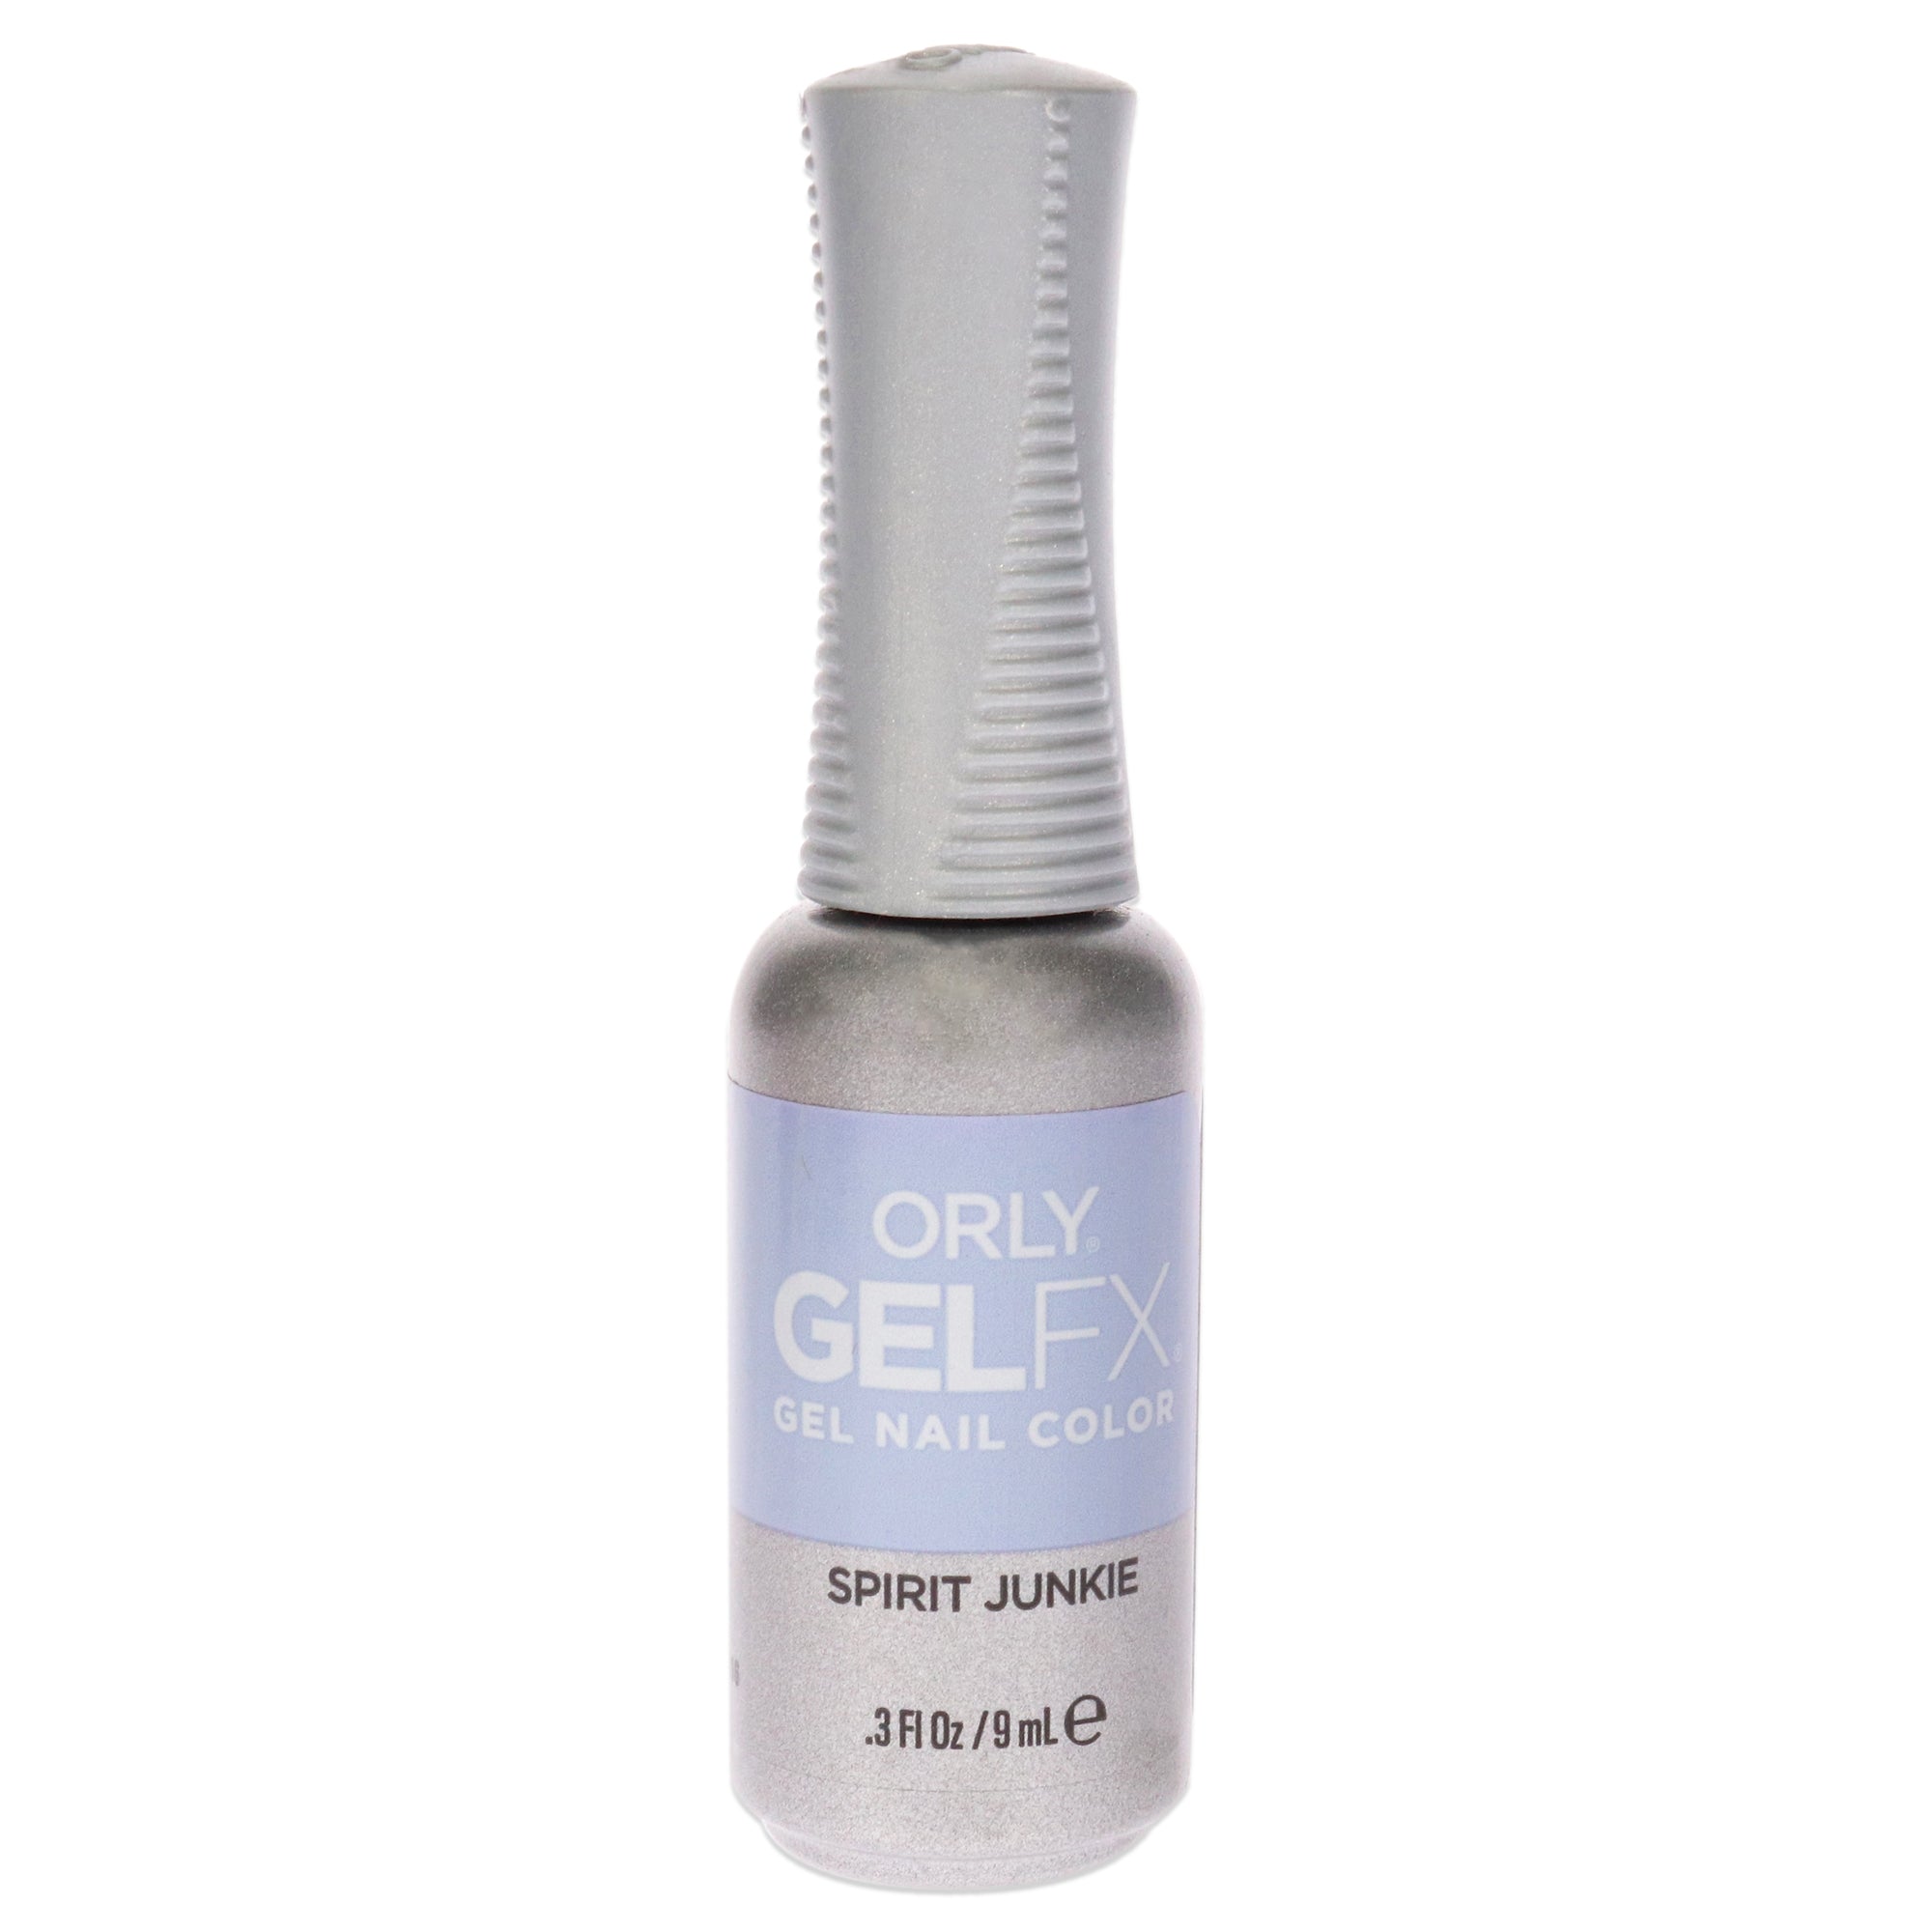 Gel Fx Gel Nail Color - 3000016 Spirit Junkie by Orly for Women - 0.3 oz Nail Polish